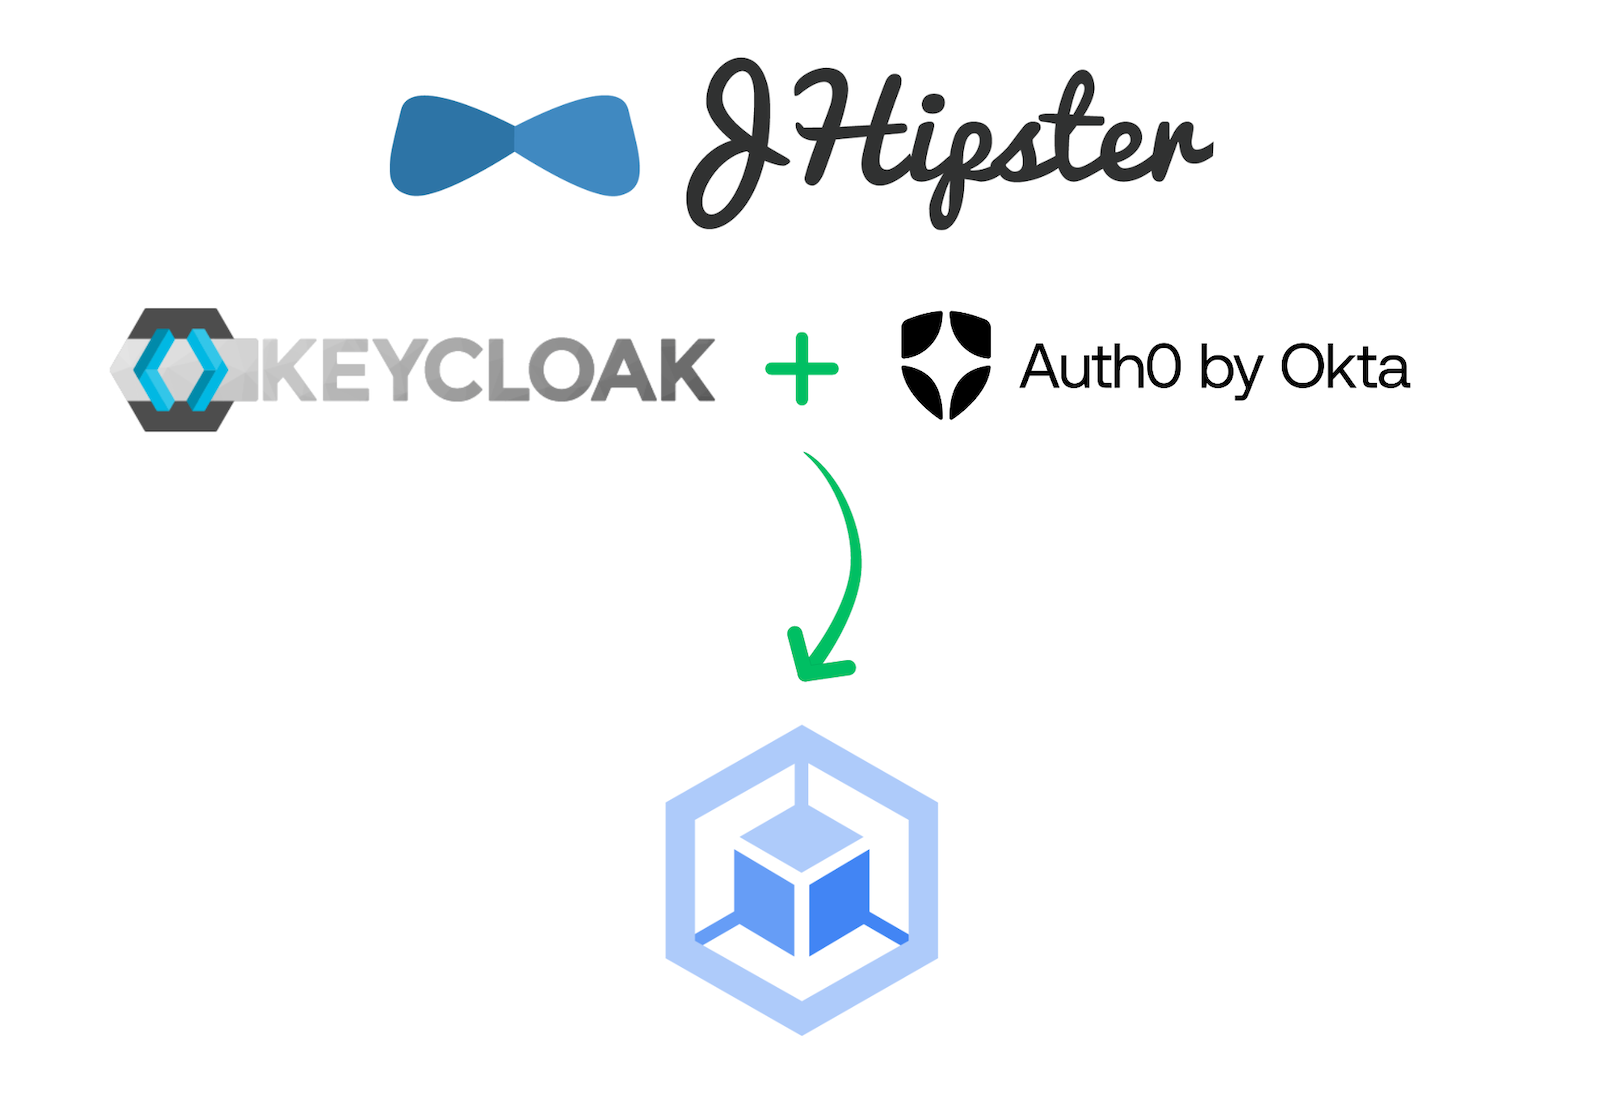 JHipster, Keycloak, Auth0, and GKE logos